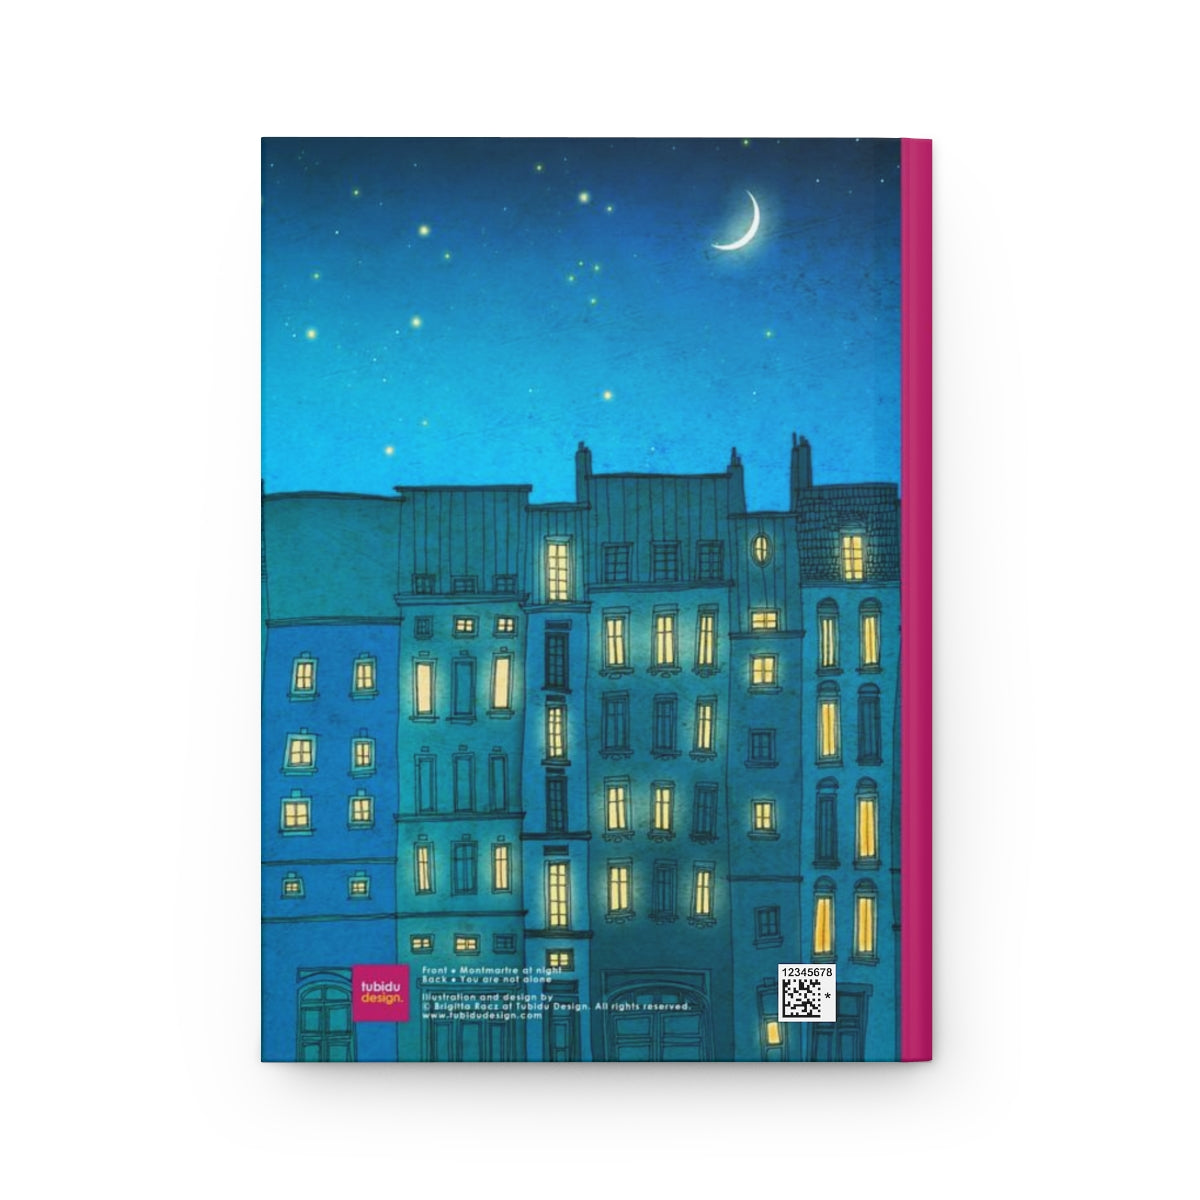 You are not alone & Montmartre at night - Paris Art Journal No.2